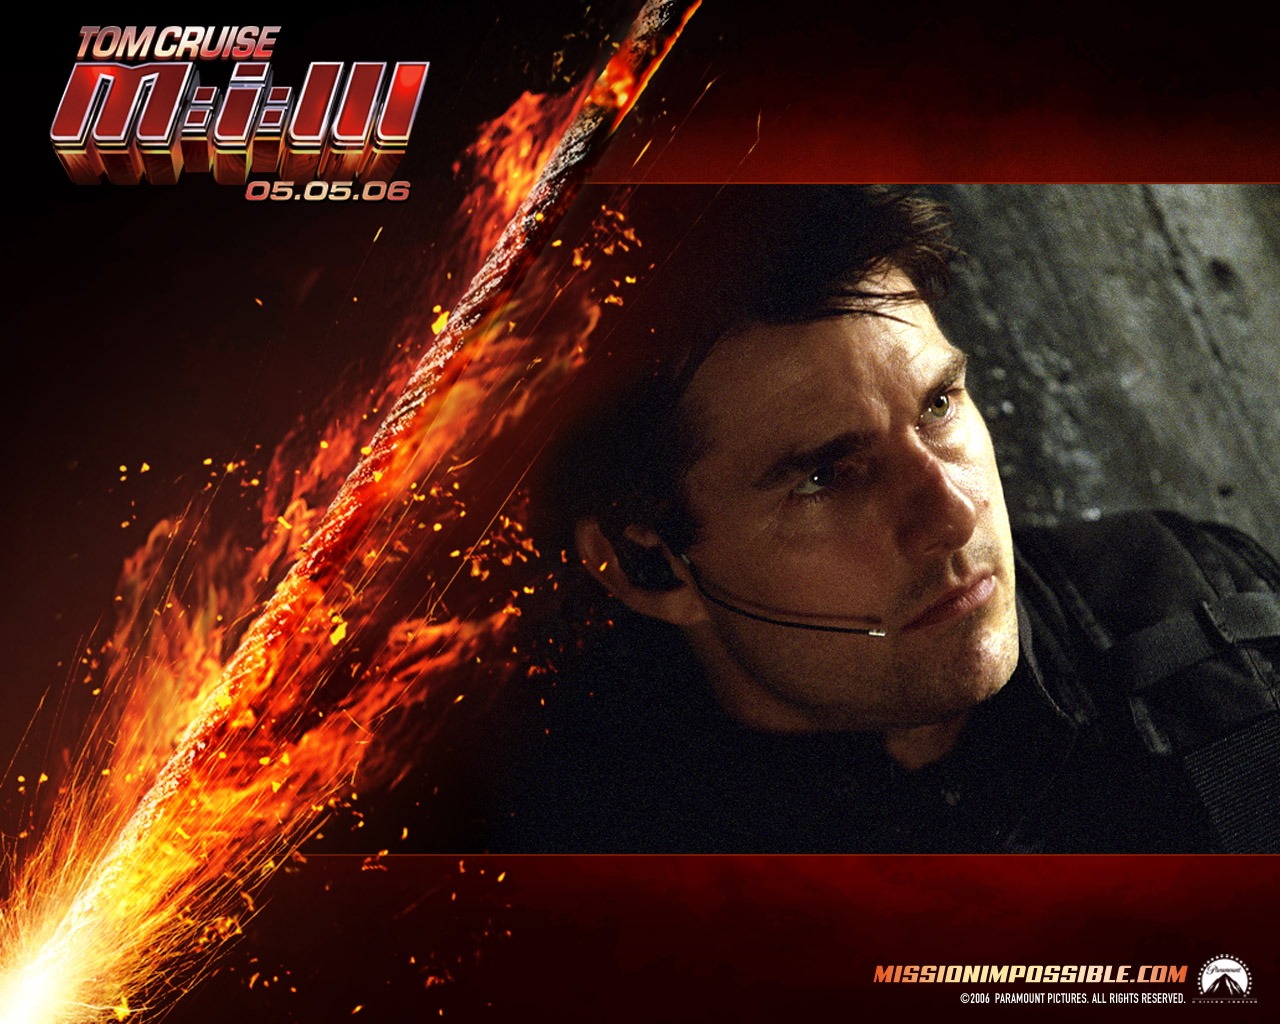 Mission Impossible 3 Wallpaper #13 - 1280x1024